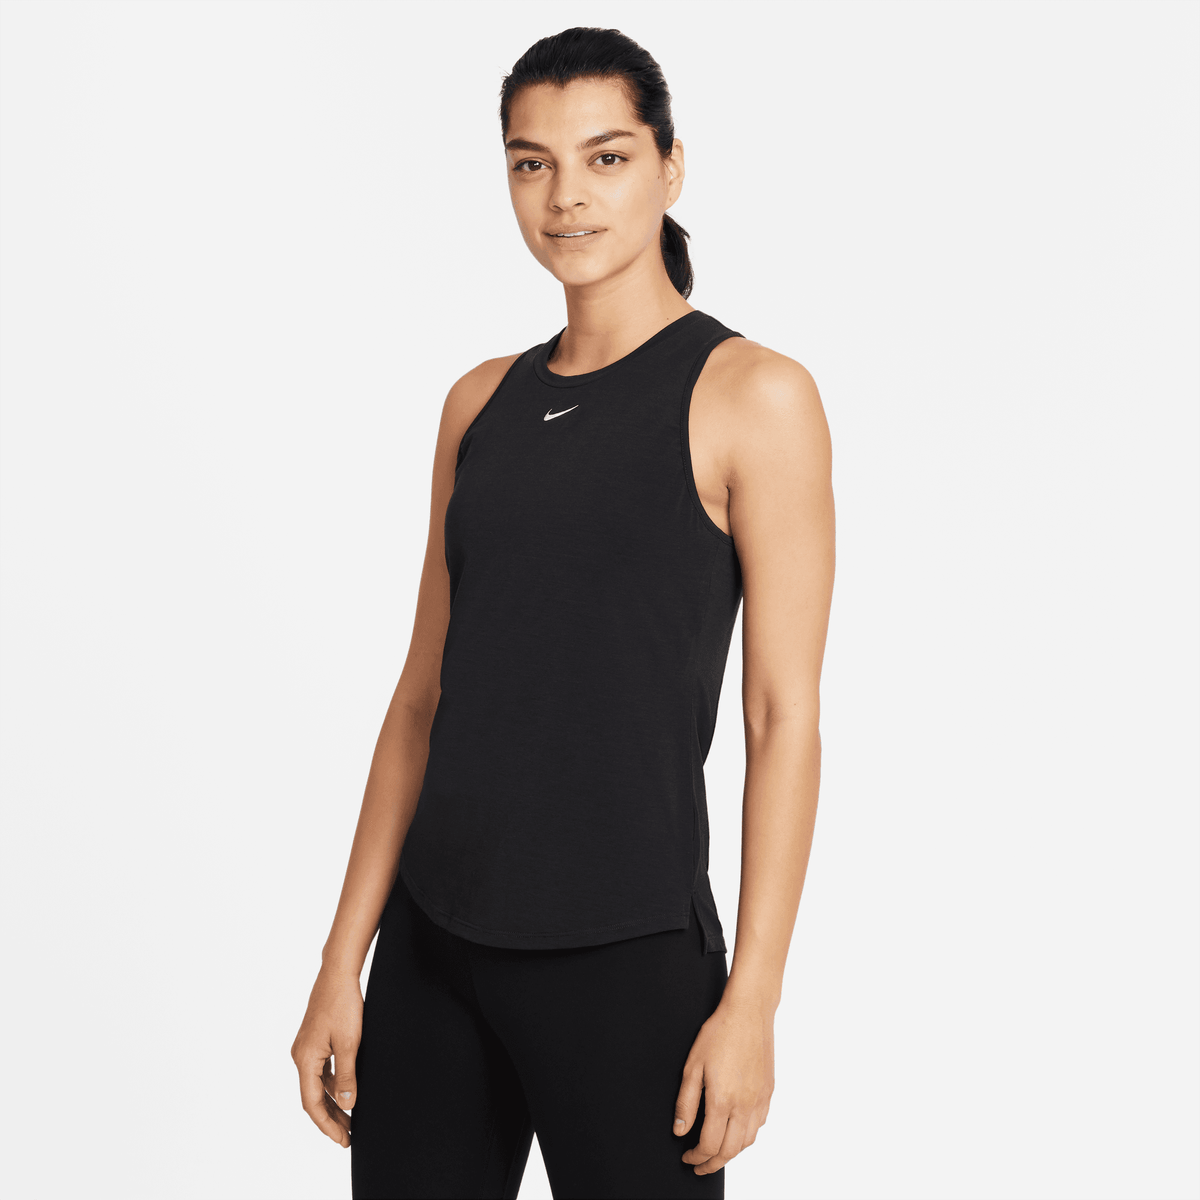 Nike-Women's Nike Dri-FIT One Luxe-Black/Reflective Silver-Pacers Running